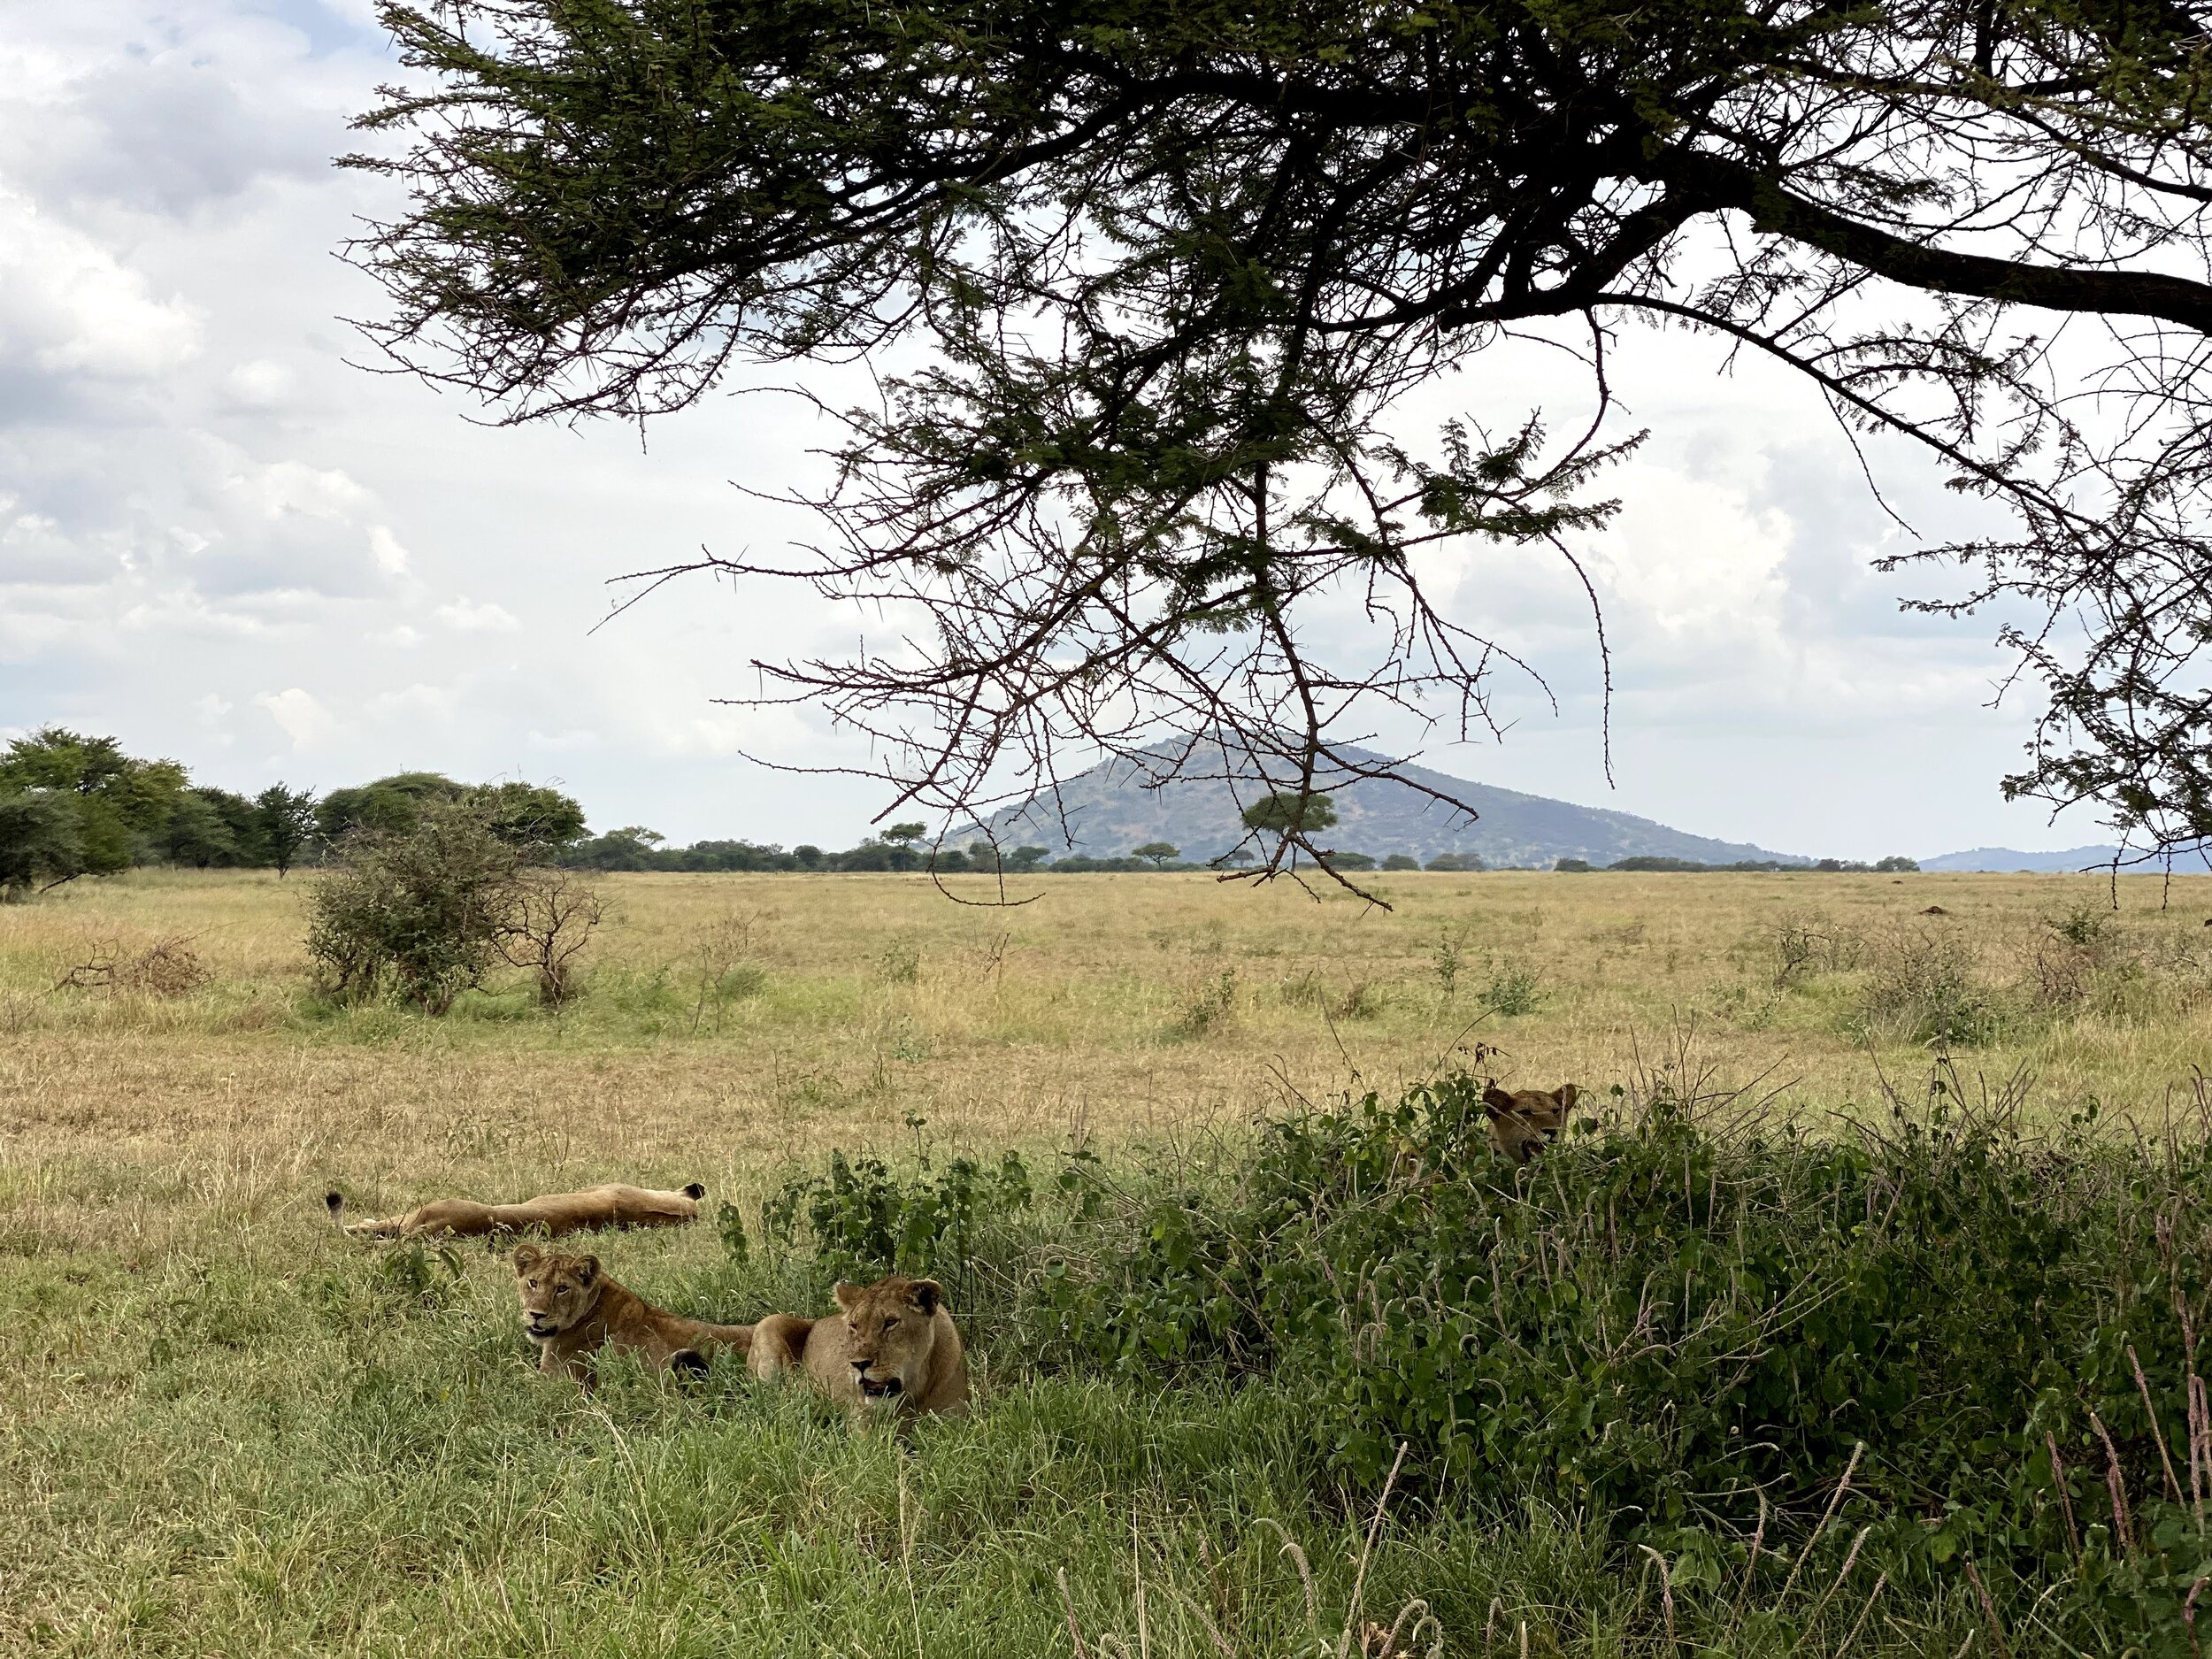  A truly sensational spotting of female lions and their completely non-habituated cubs 